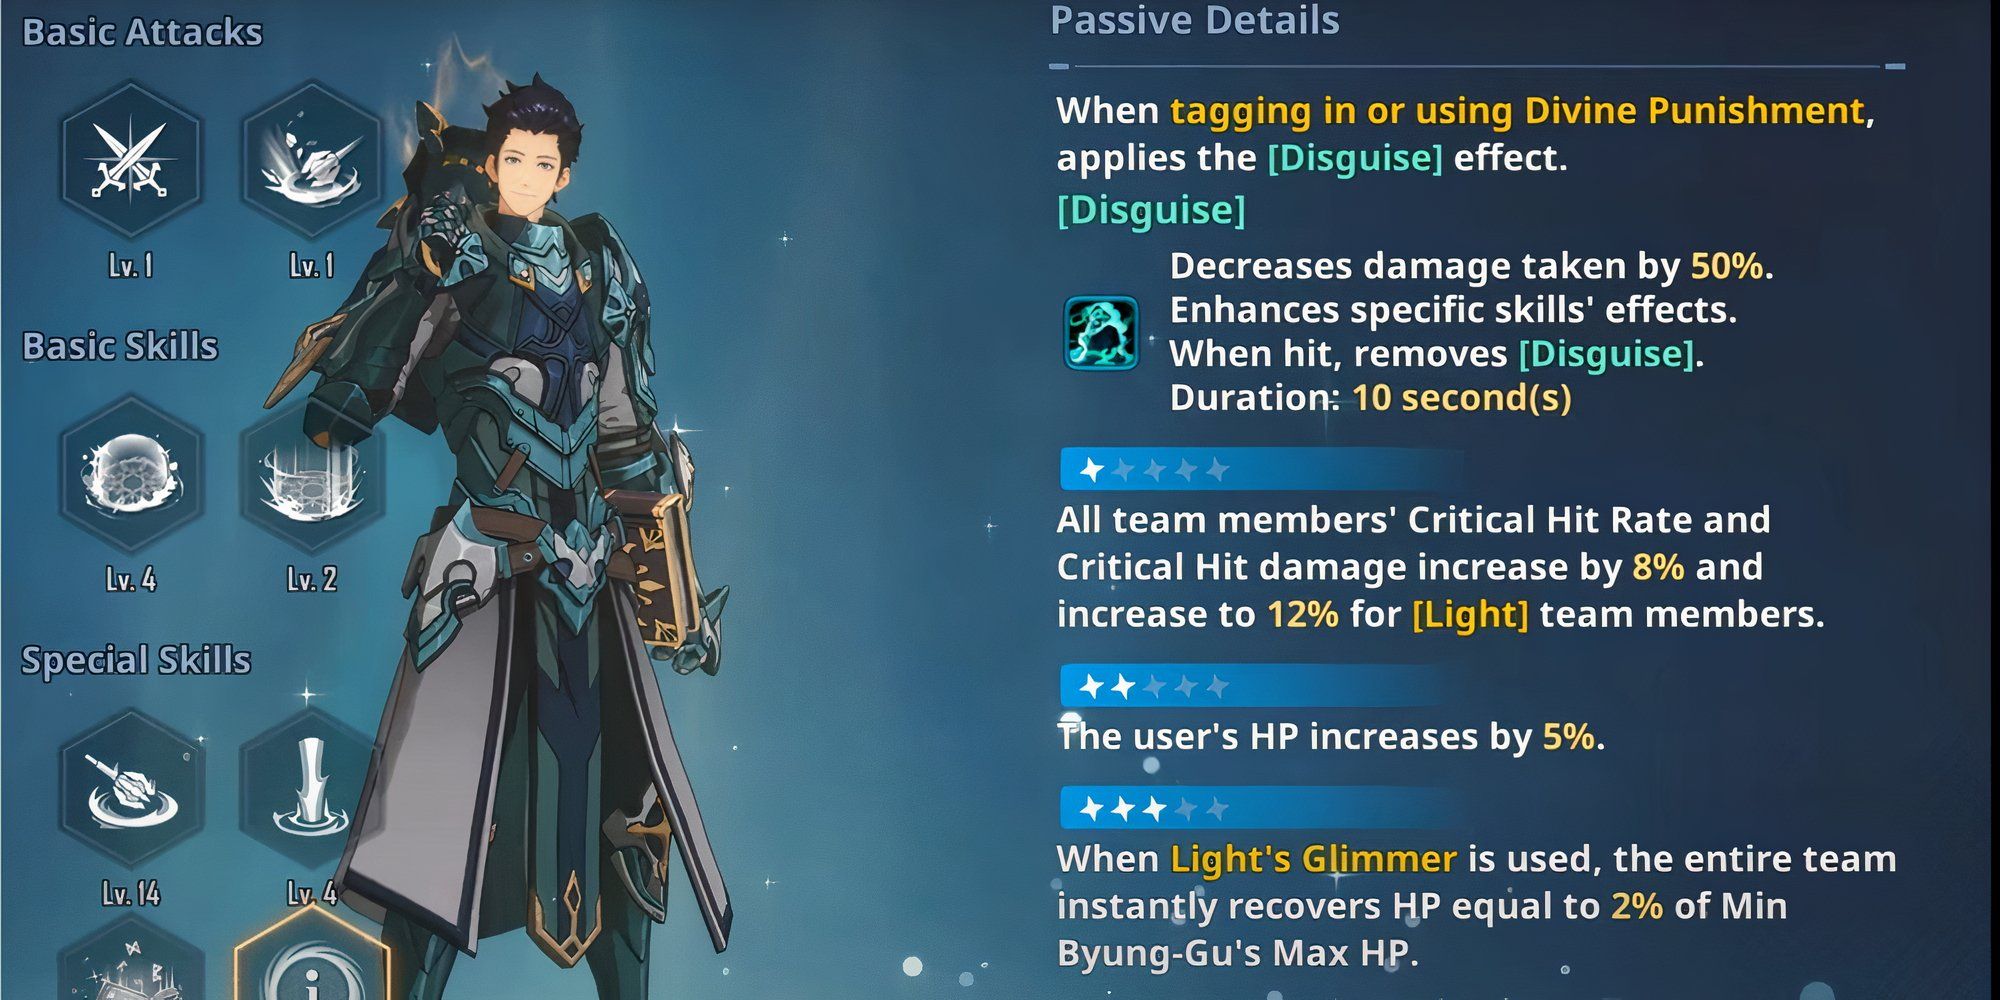 Ming Byung-Gu character showcase with his passive details